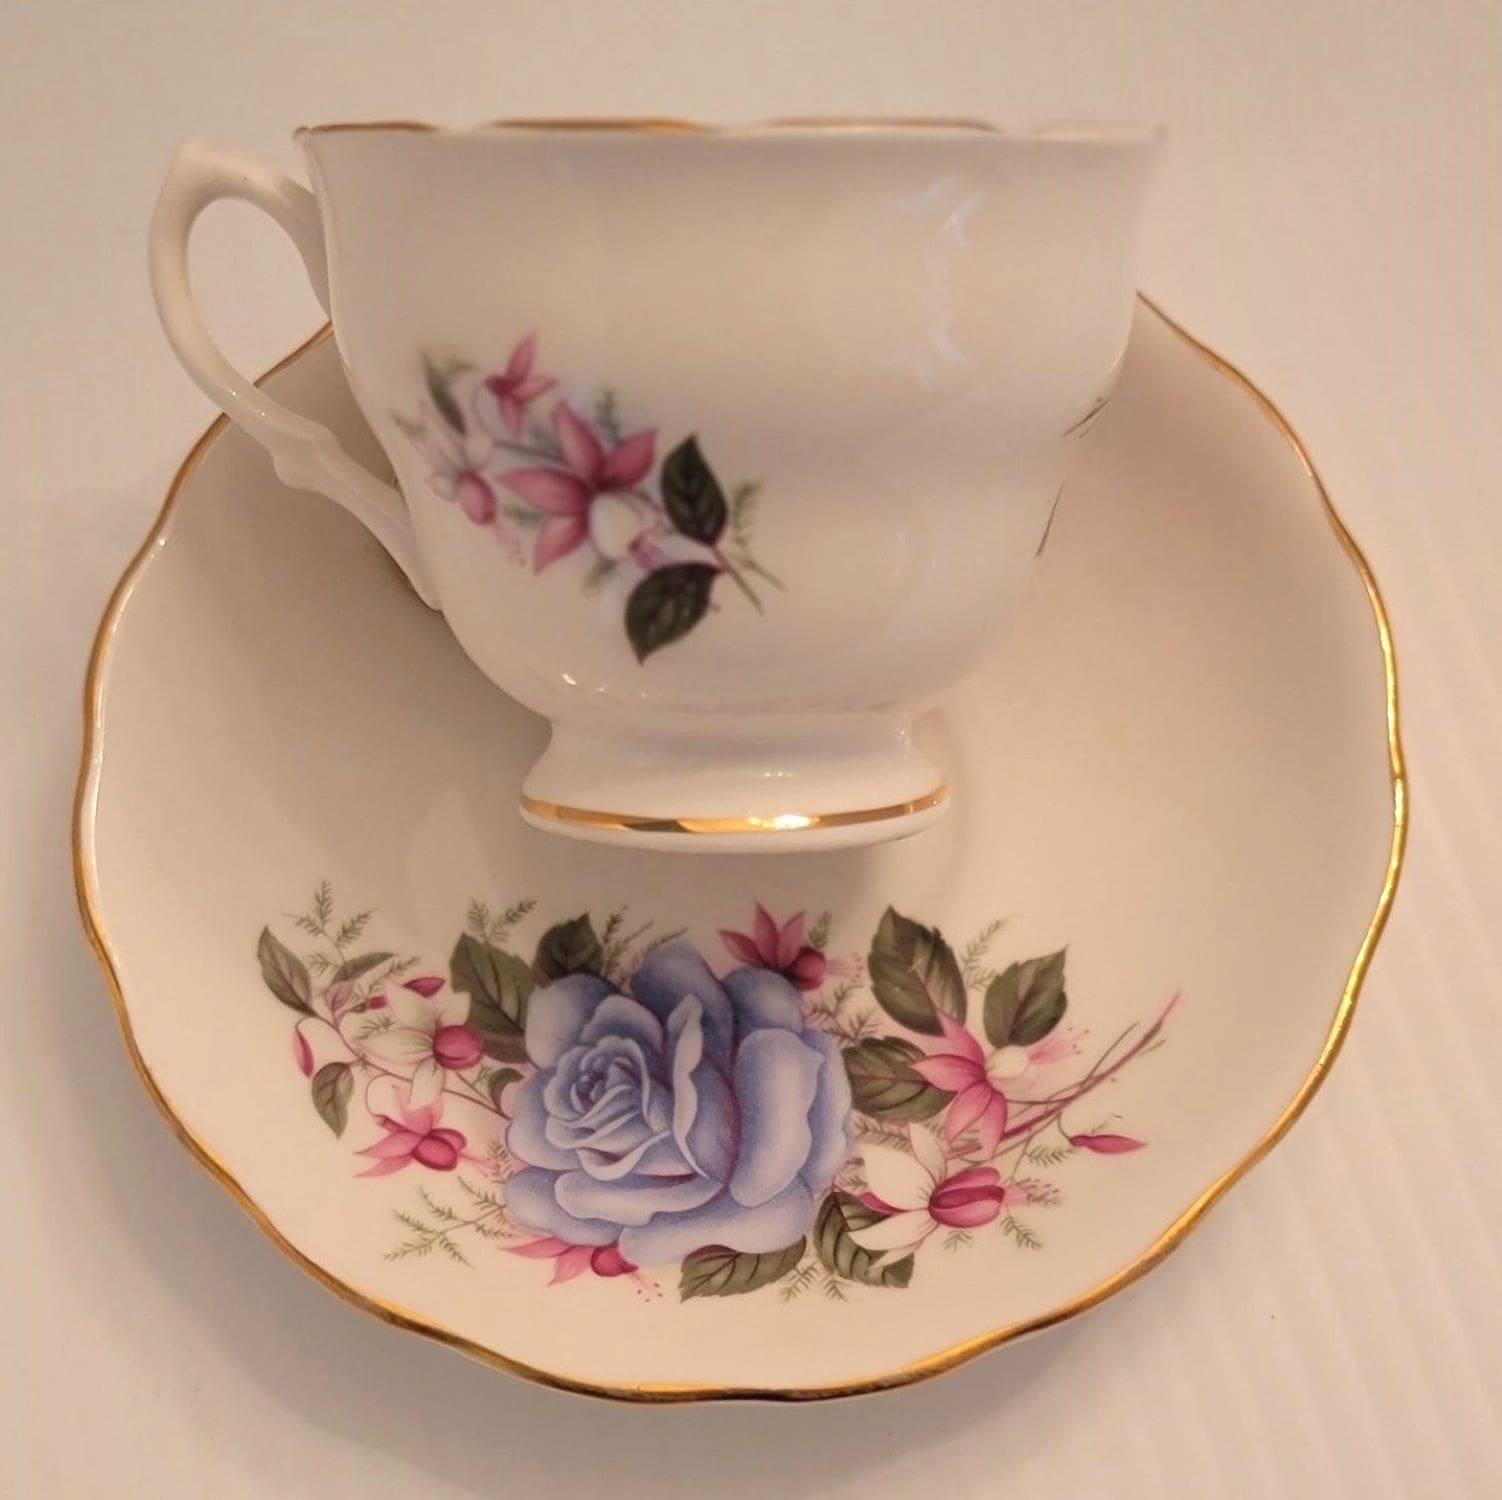 A tea cup and saucer featuring a delicate blue rose design.